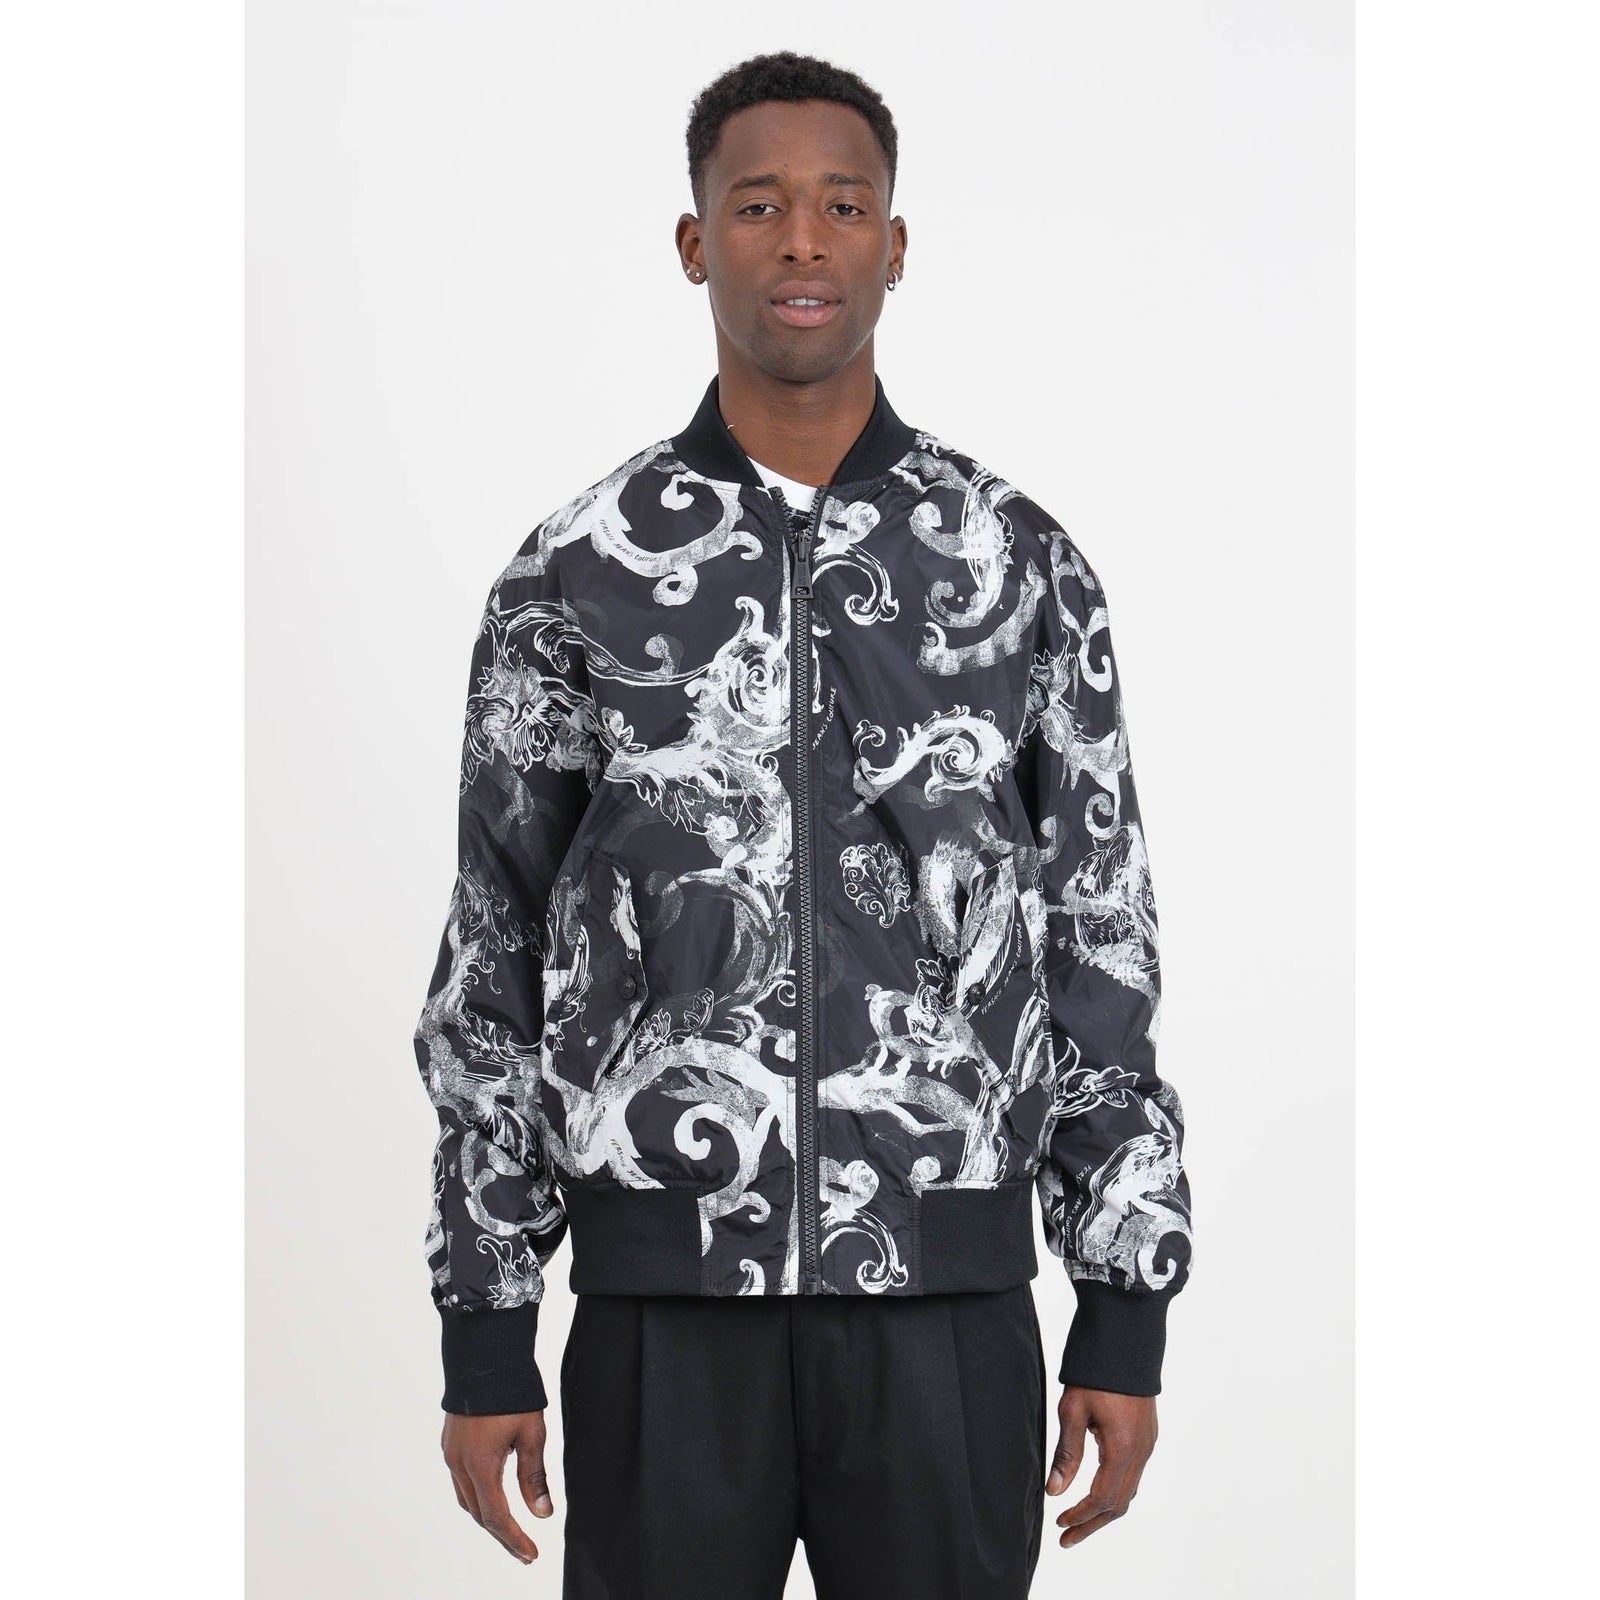 VERSACE JEANS COUTURE JACKET - Yooto